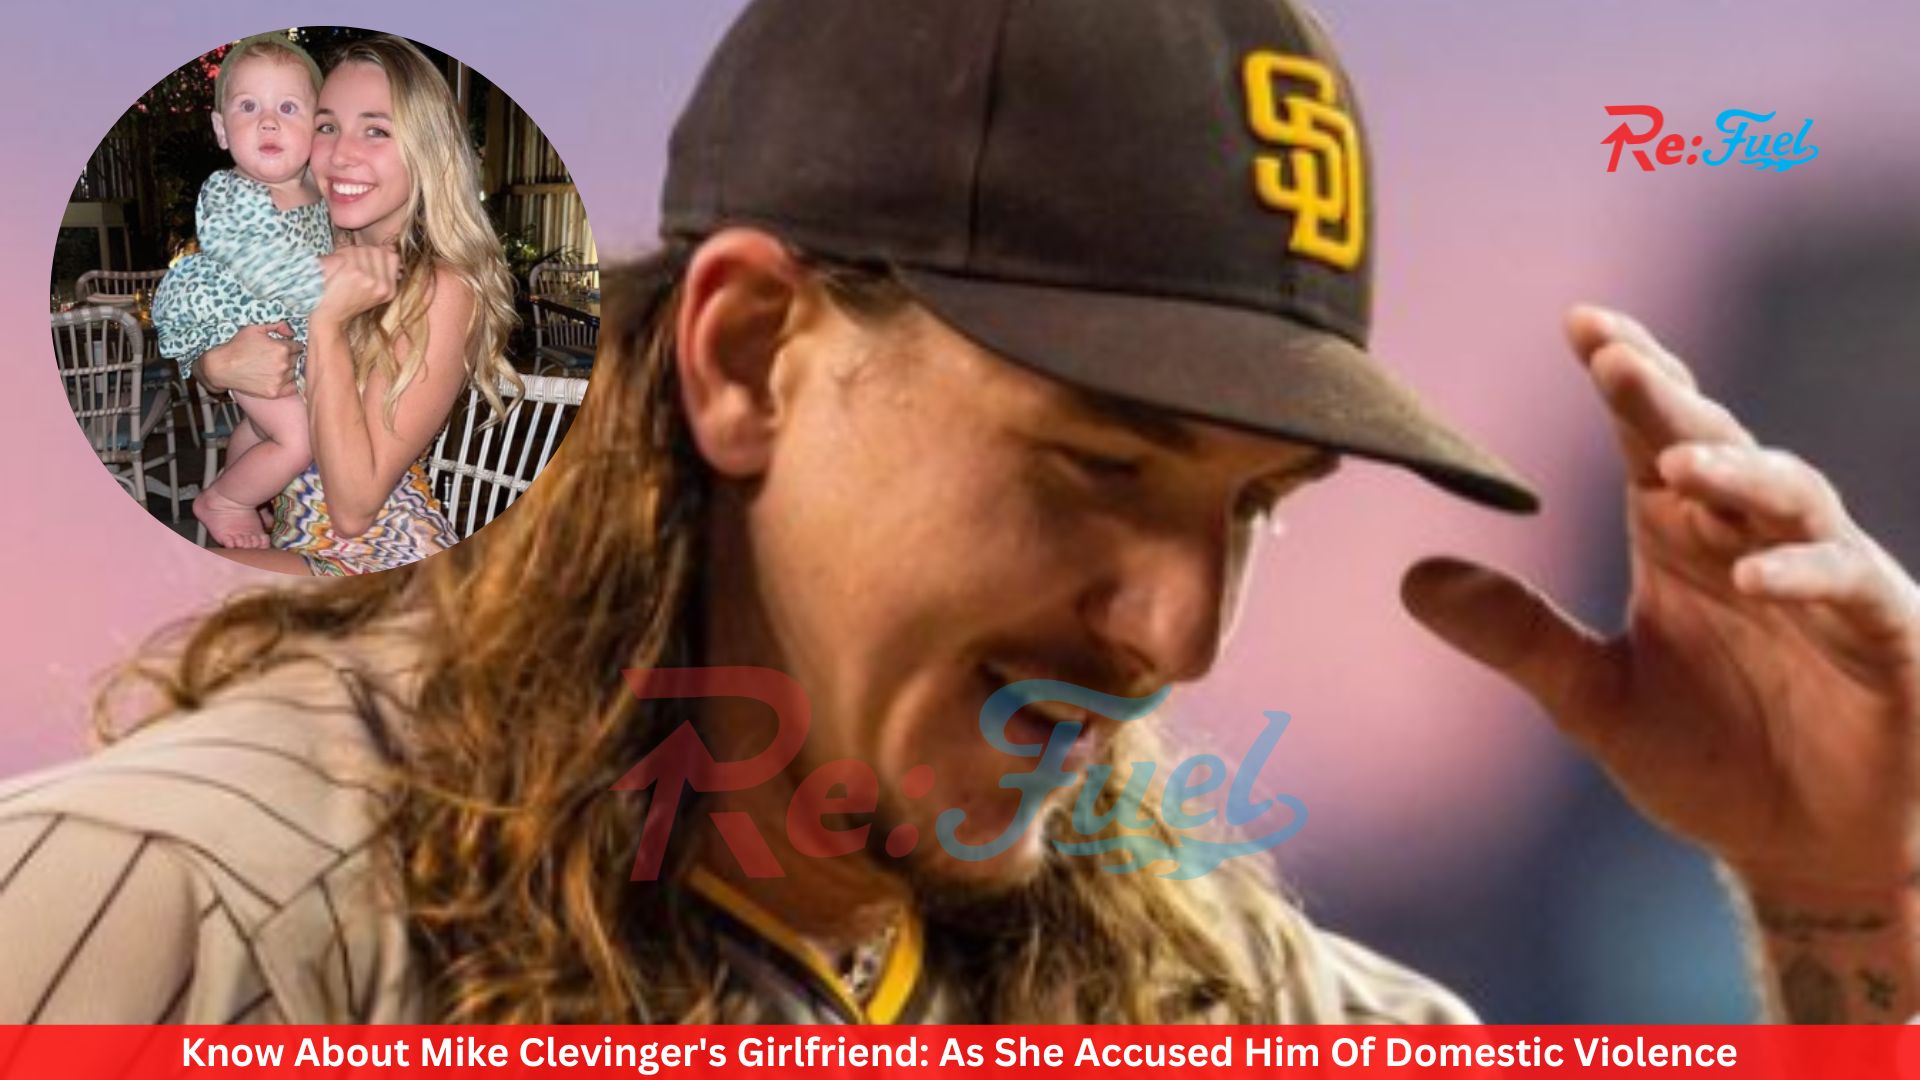 Know About Mike Clevinger's Girlfriend: As She Accused Him Of Domestic Violence